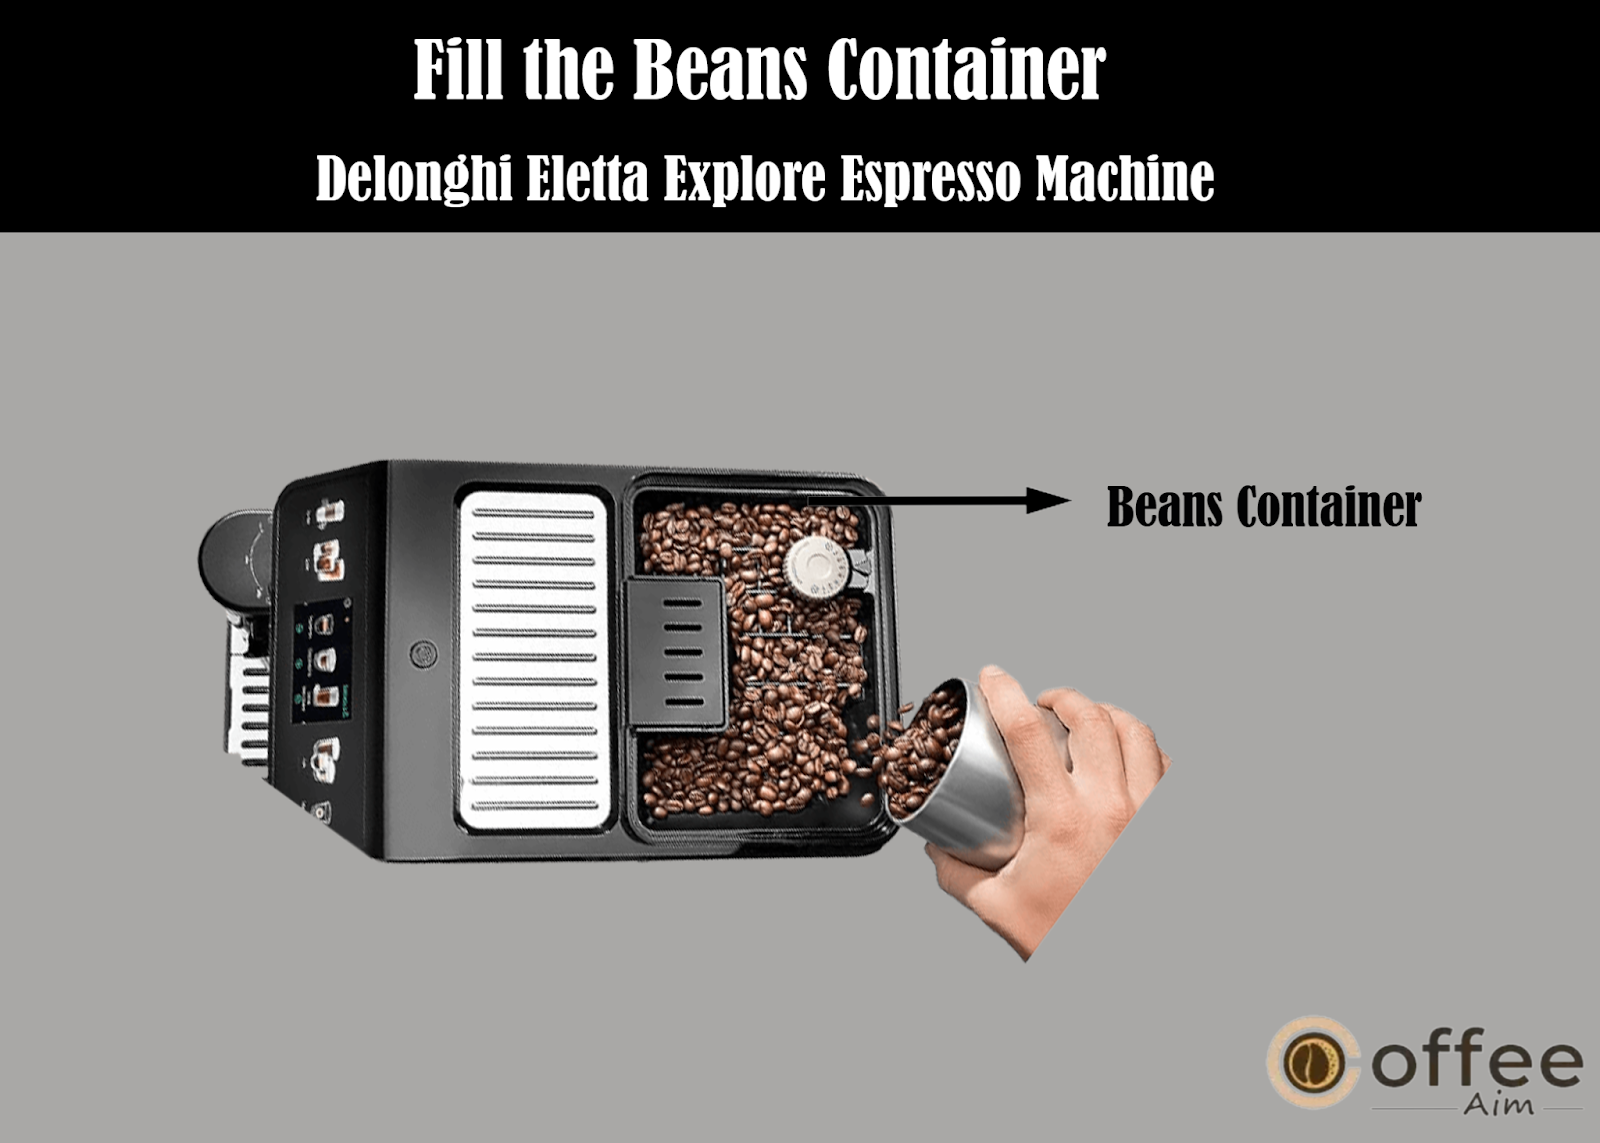 This image demonstrates the step of filling the beans container with your preferred coffee beans for the Delonghi Eletta Explore Espresso Machine, as detailed in the article "How to Use the Delonghi Eletta Explore Espresso Machine."